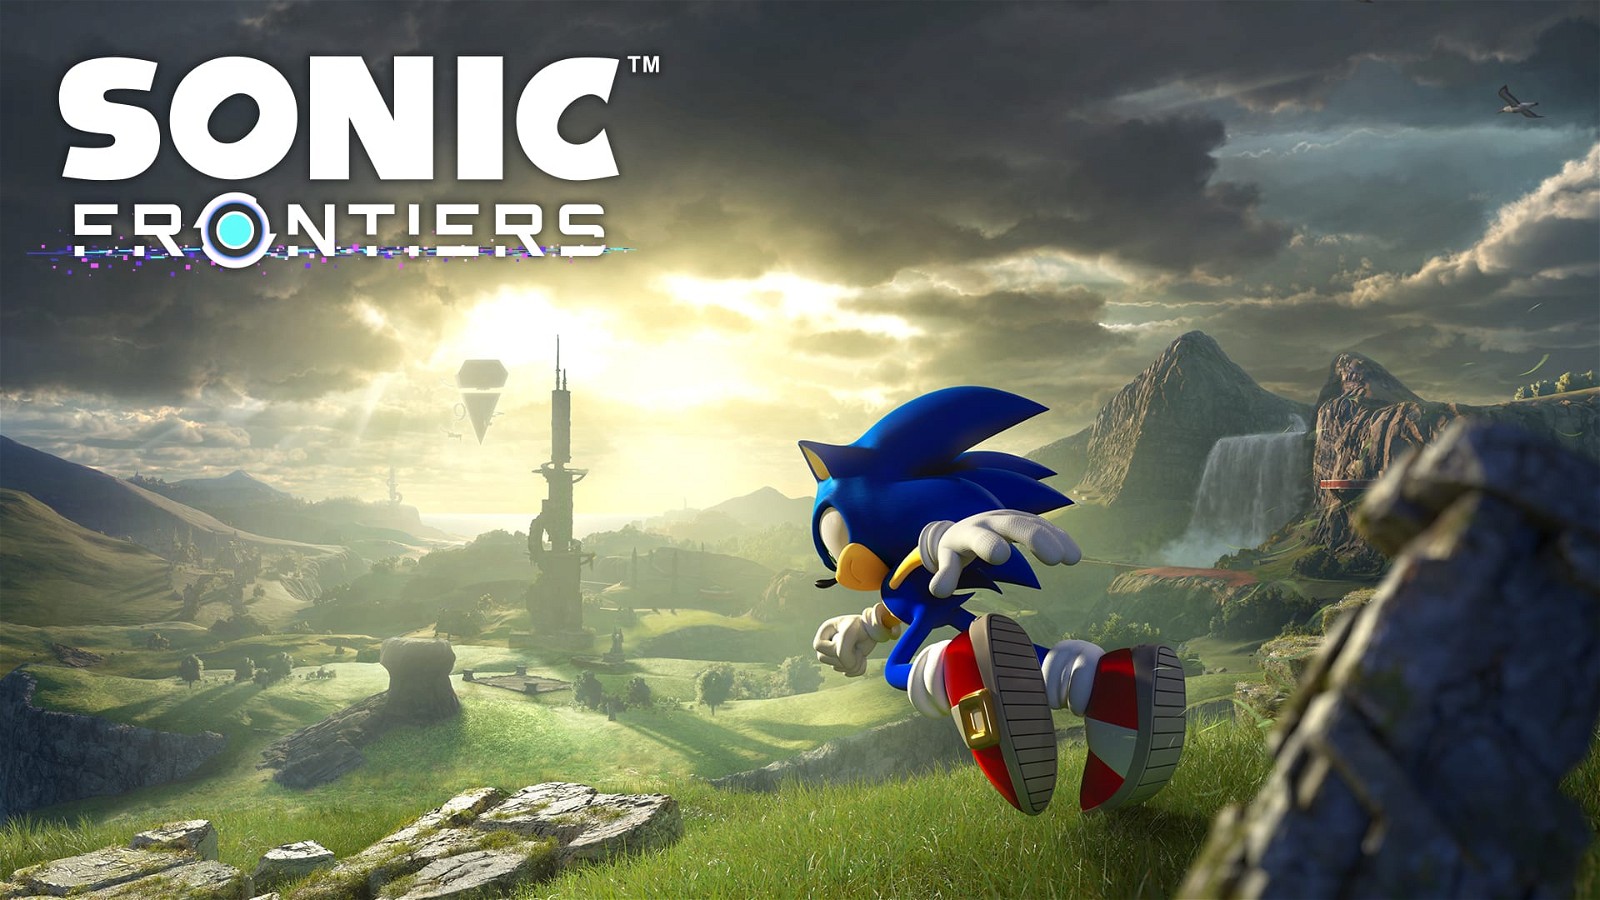 Sonic Frontiers: The Final Horizon is a Free Update for the Open-World Sonic Game